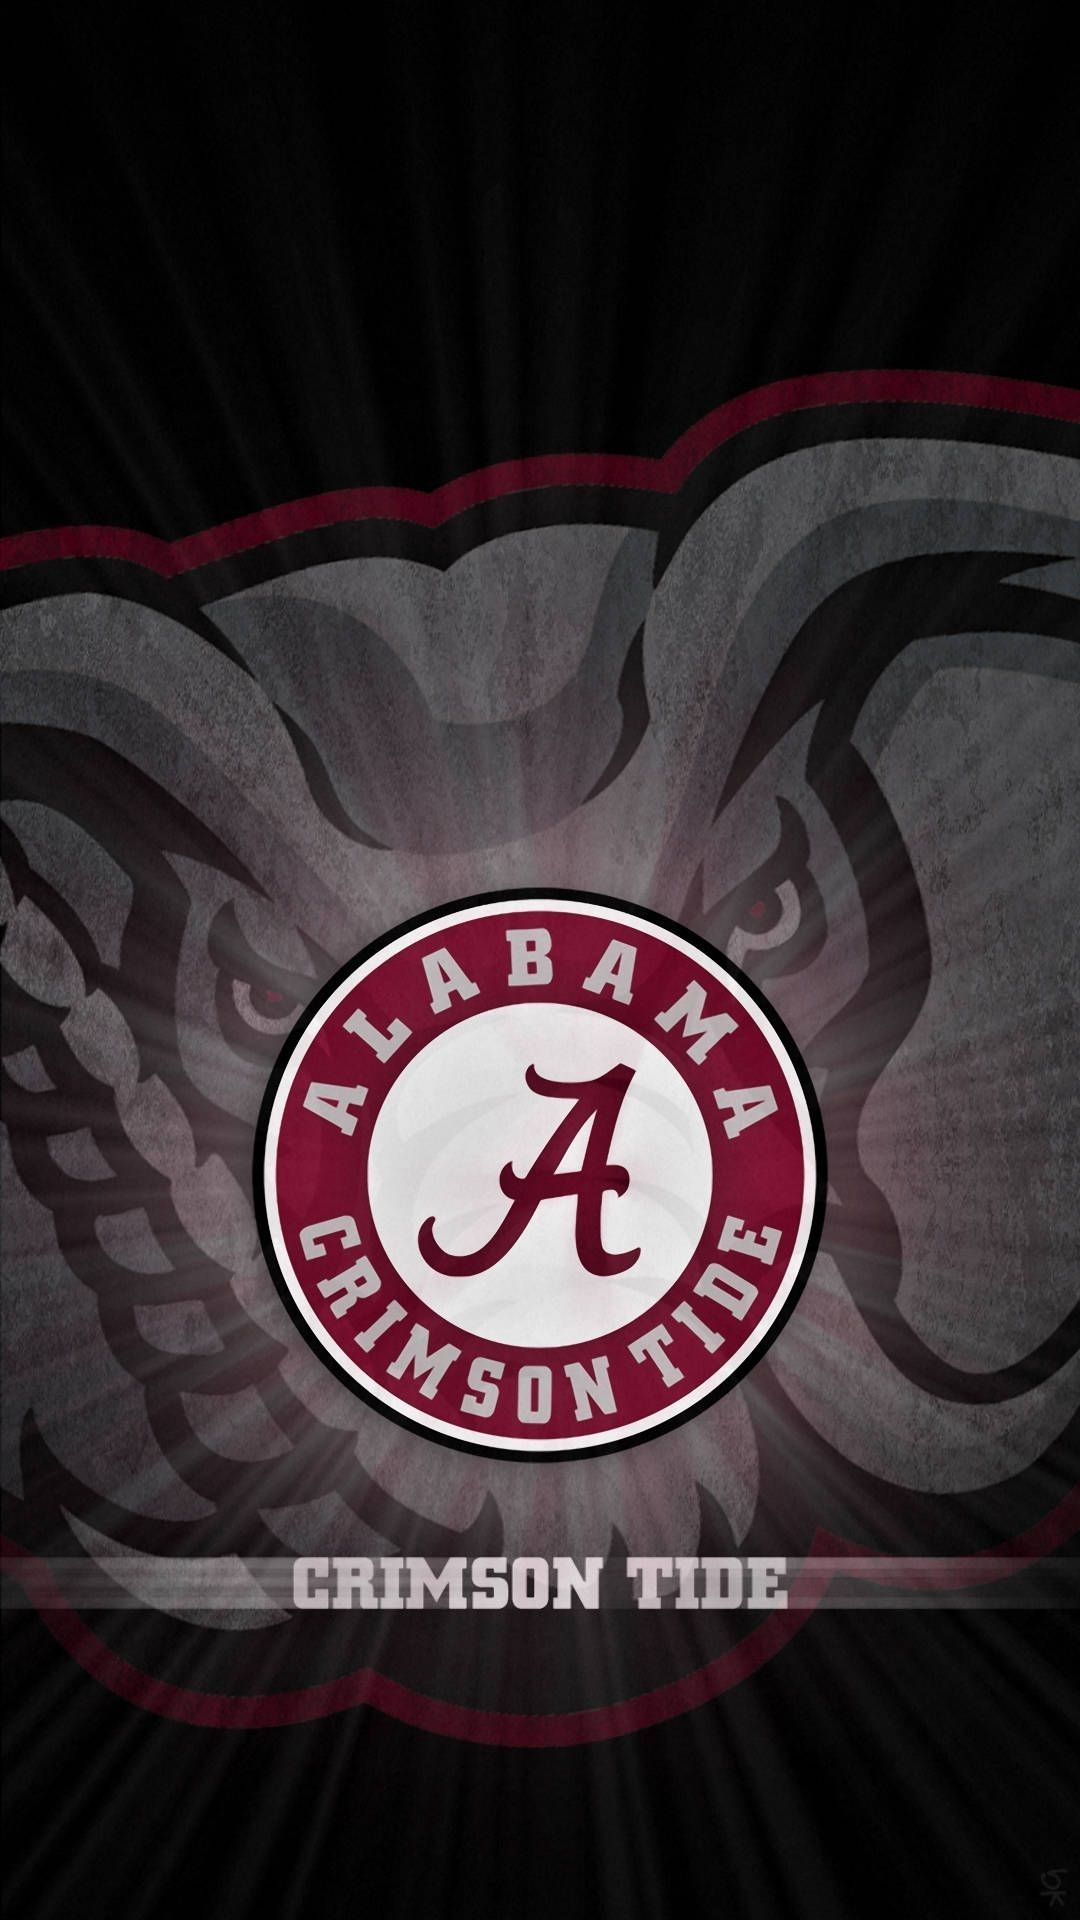 1080x1920 10 New Alabama Wallpaper For Android FULL HD 1080p For PC Background | Alabama crimson tide football wallpaper, Alabama crimson tide football, Alabama wallpaper